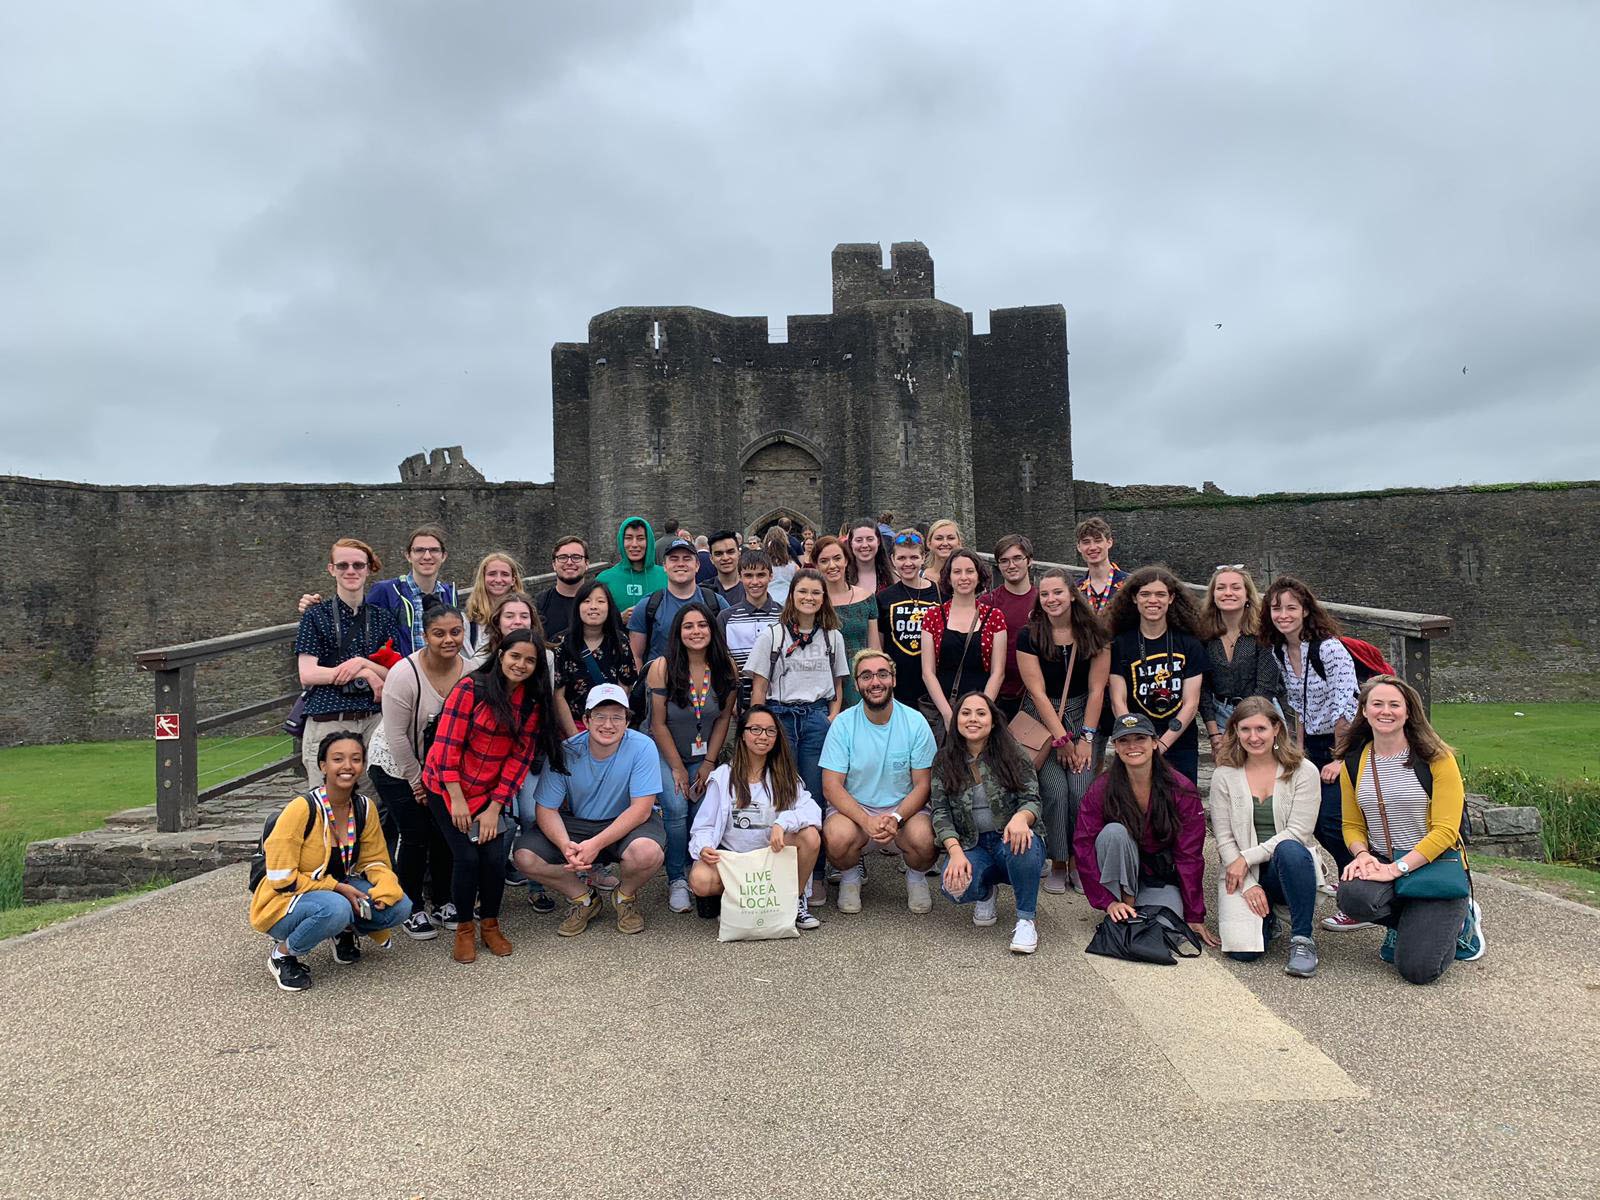 Students pose in front of castle